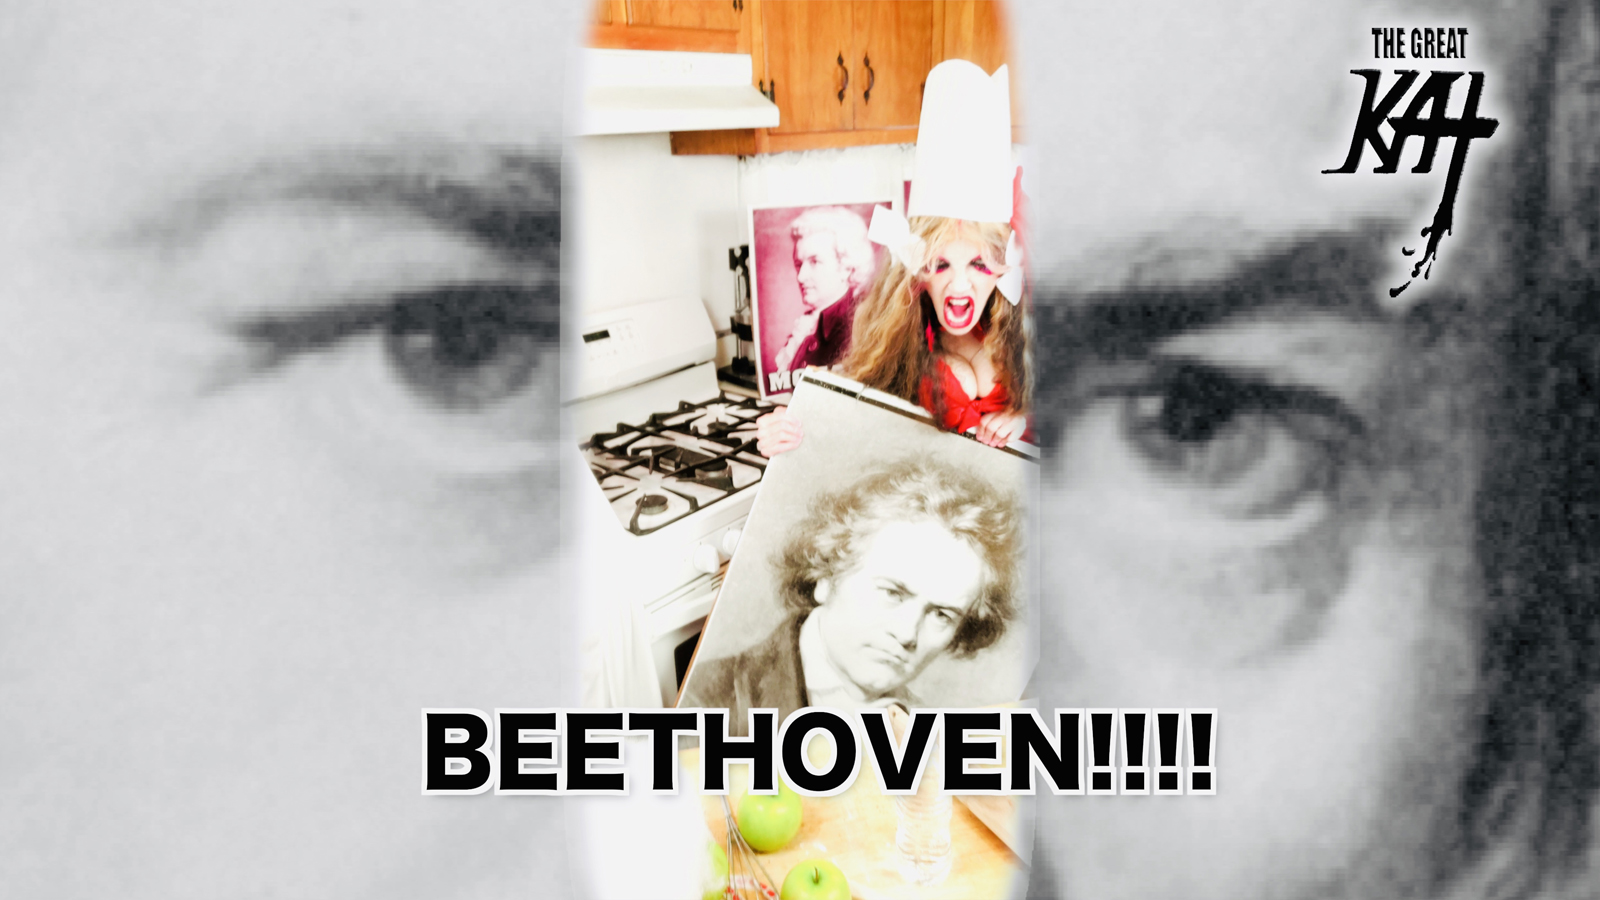 BEETHOVEN! From CHEF GREAT KAT BAKES GERMAN APPLE STRUDEL WITH MOZART!!